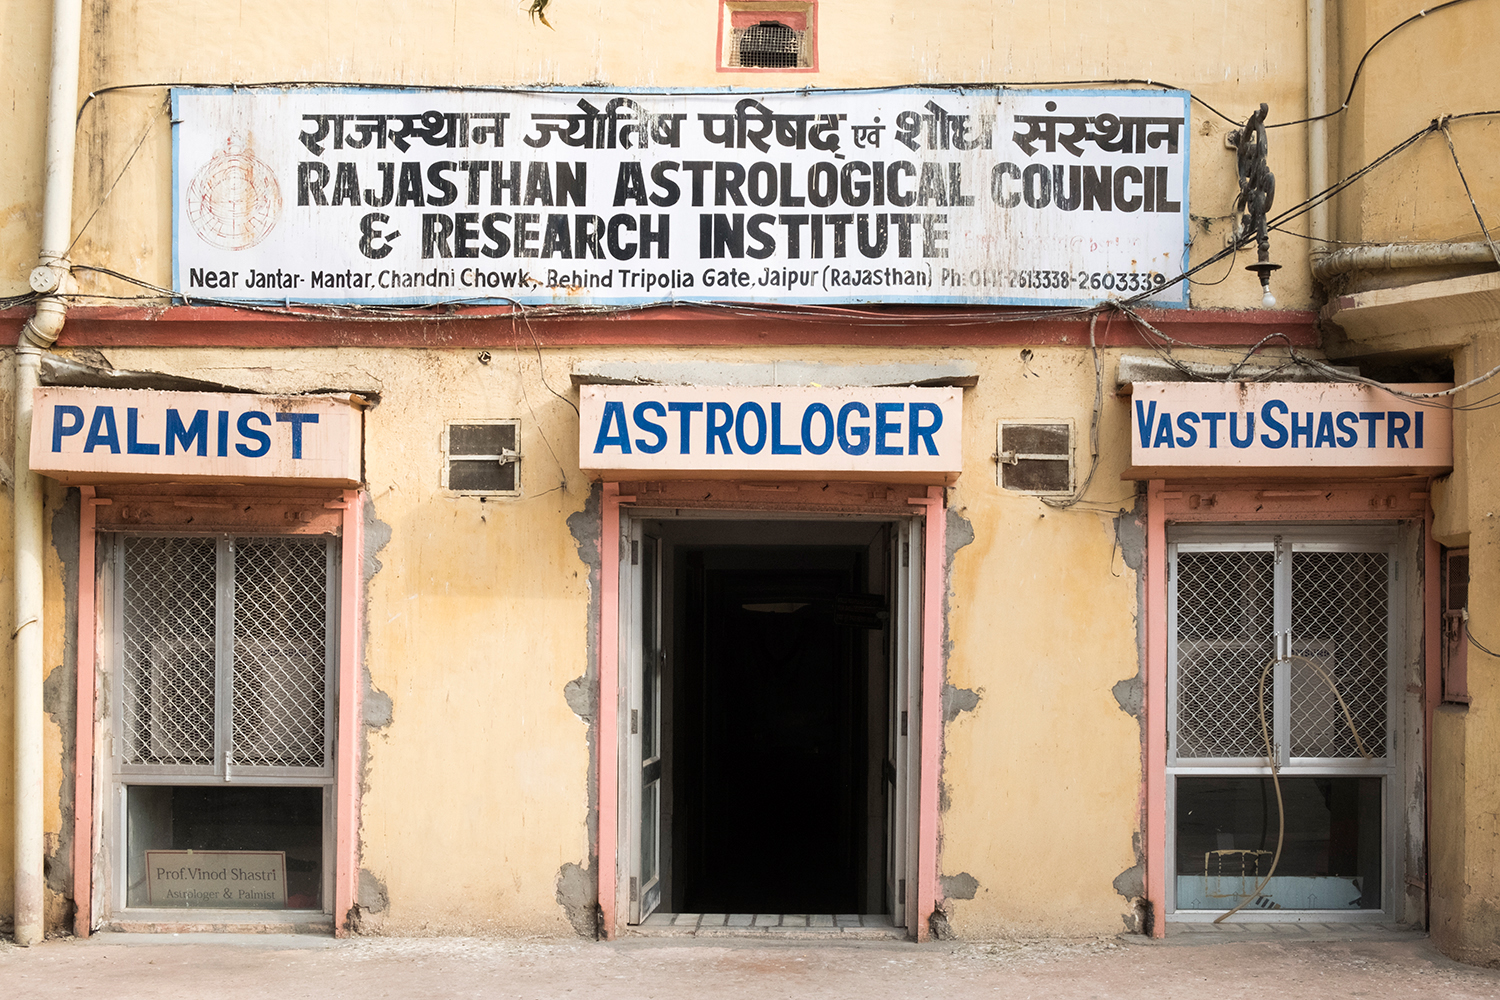 The Rajasthan Astrological Council and Research Institute, advertising a palm reading, astrology, and vastu shastri consultations, is located behind Jantar Mantar north of the old city in Jaipur, Rajasthan, India. Vastu Shastra is a traditional Hindu system of architecture and spatial geometry intended to integrate buildings with nature.